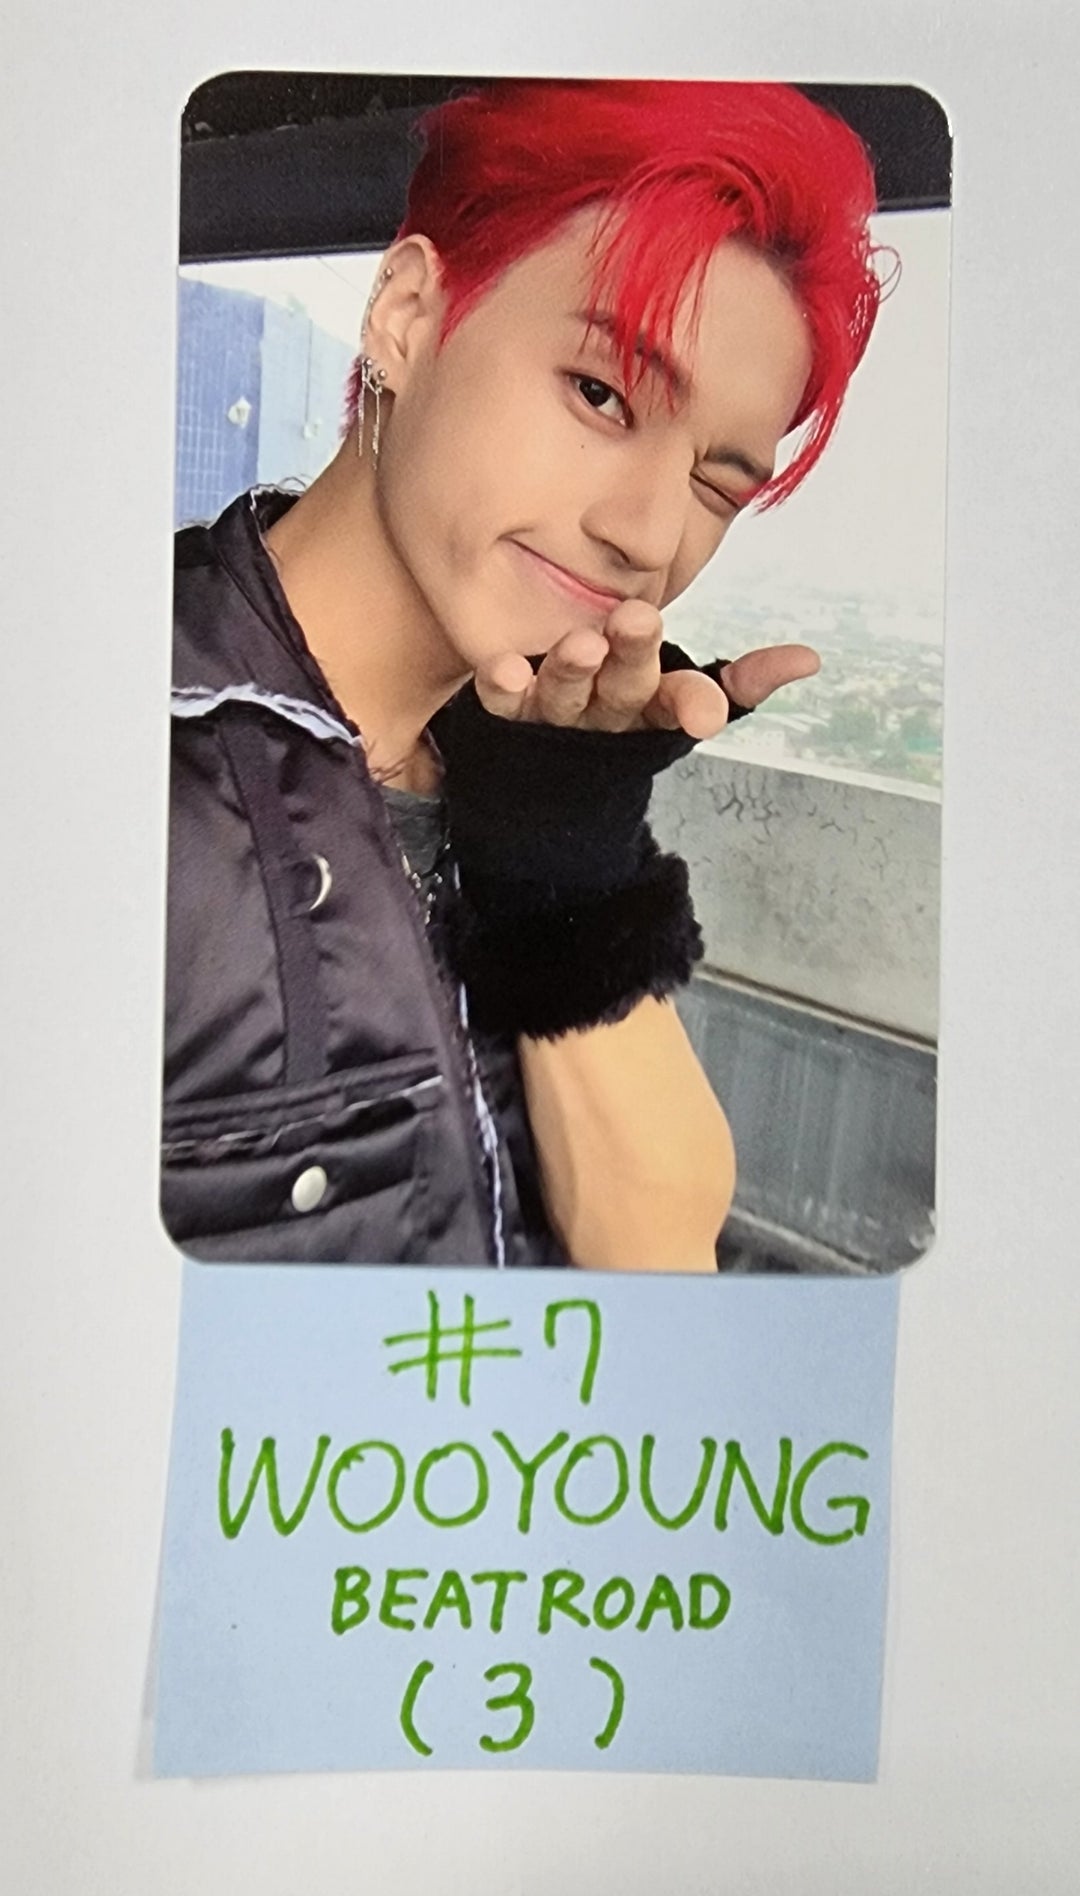 Ateez 'SPIN OFF : FROM THE WITNESS' - Beatroad Fansign Event Photocard